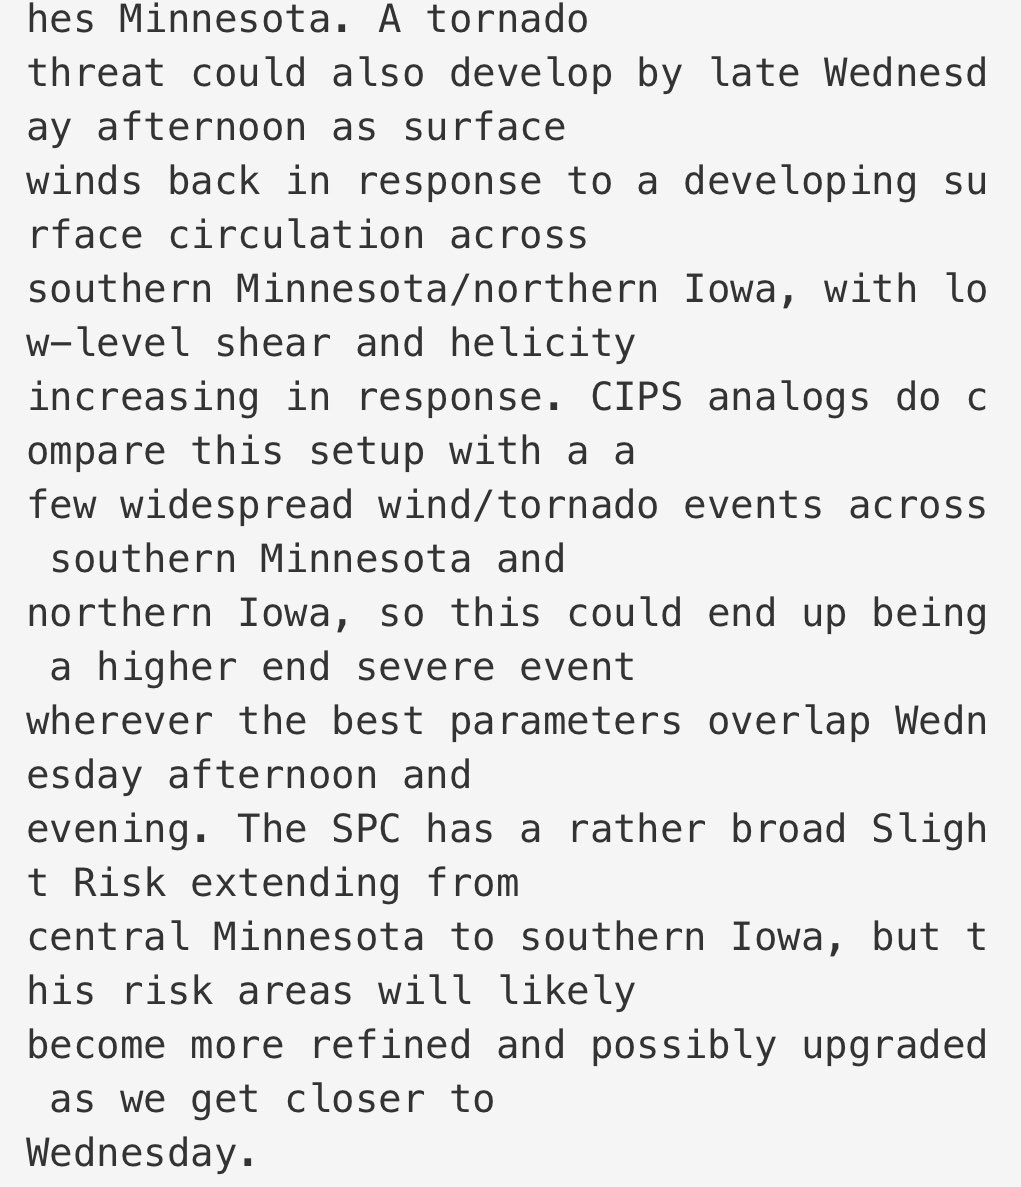 That is some strong wording on AFDMPX regarding Wednesday’s severe weather threat for portions of Iowa and Minnesota… https://t.co/UnmTEGOOhd